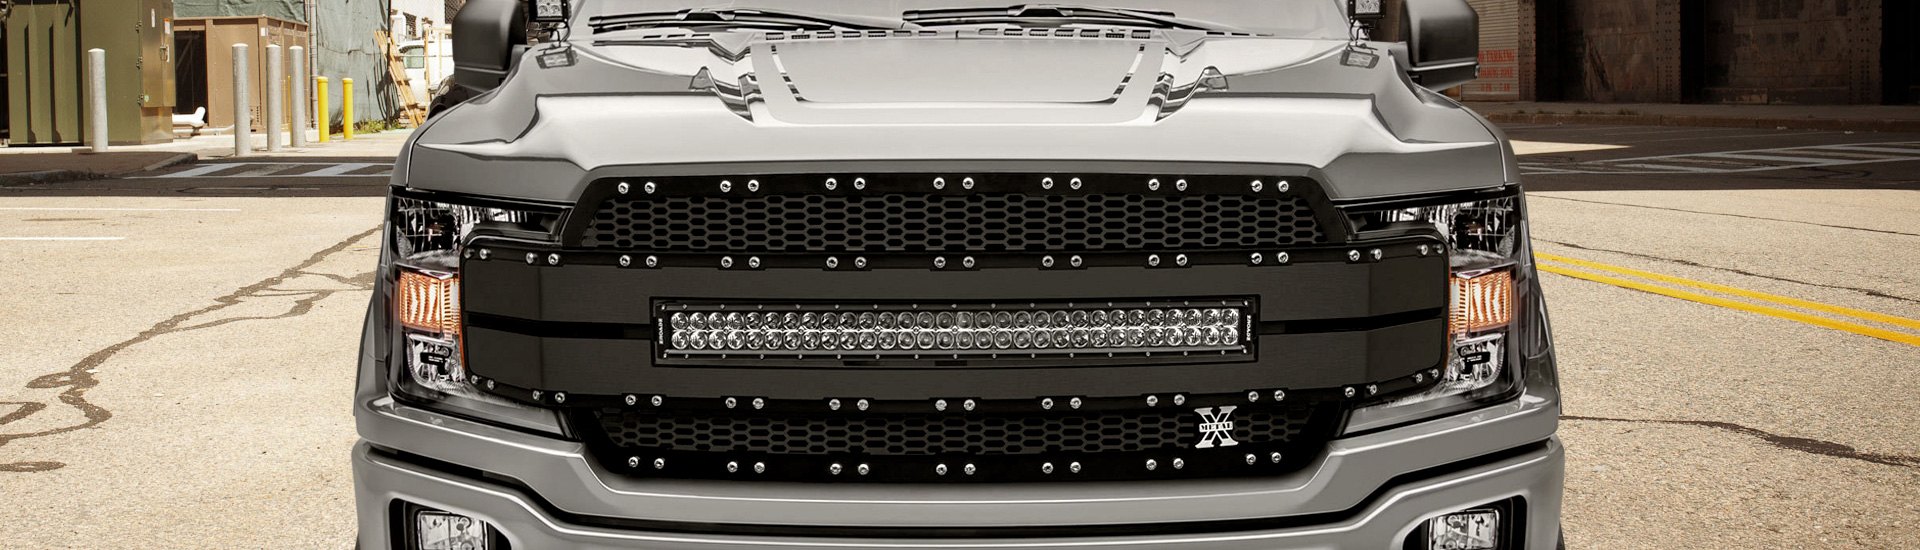 Exclusive Series of T-Rex TORCH-AL Grilles For Ford F-Series Trucks Has Arrived